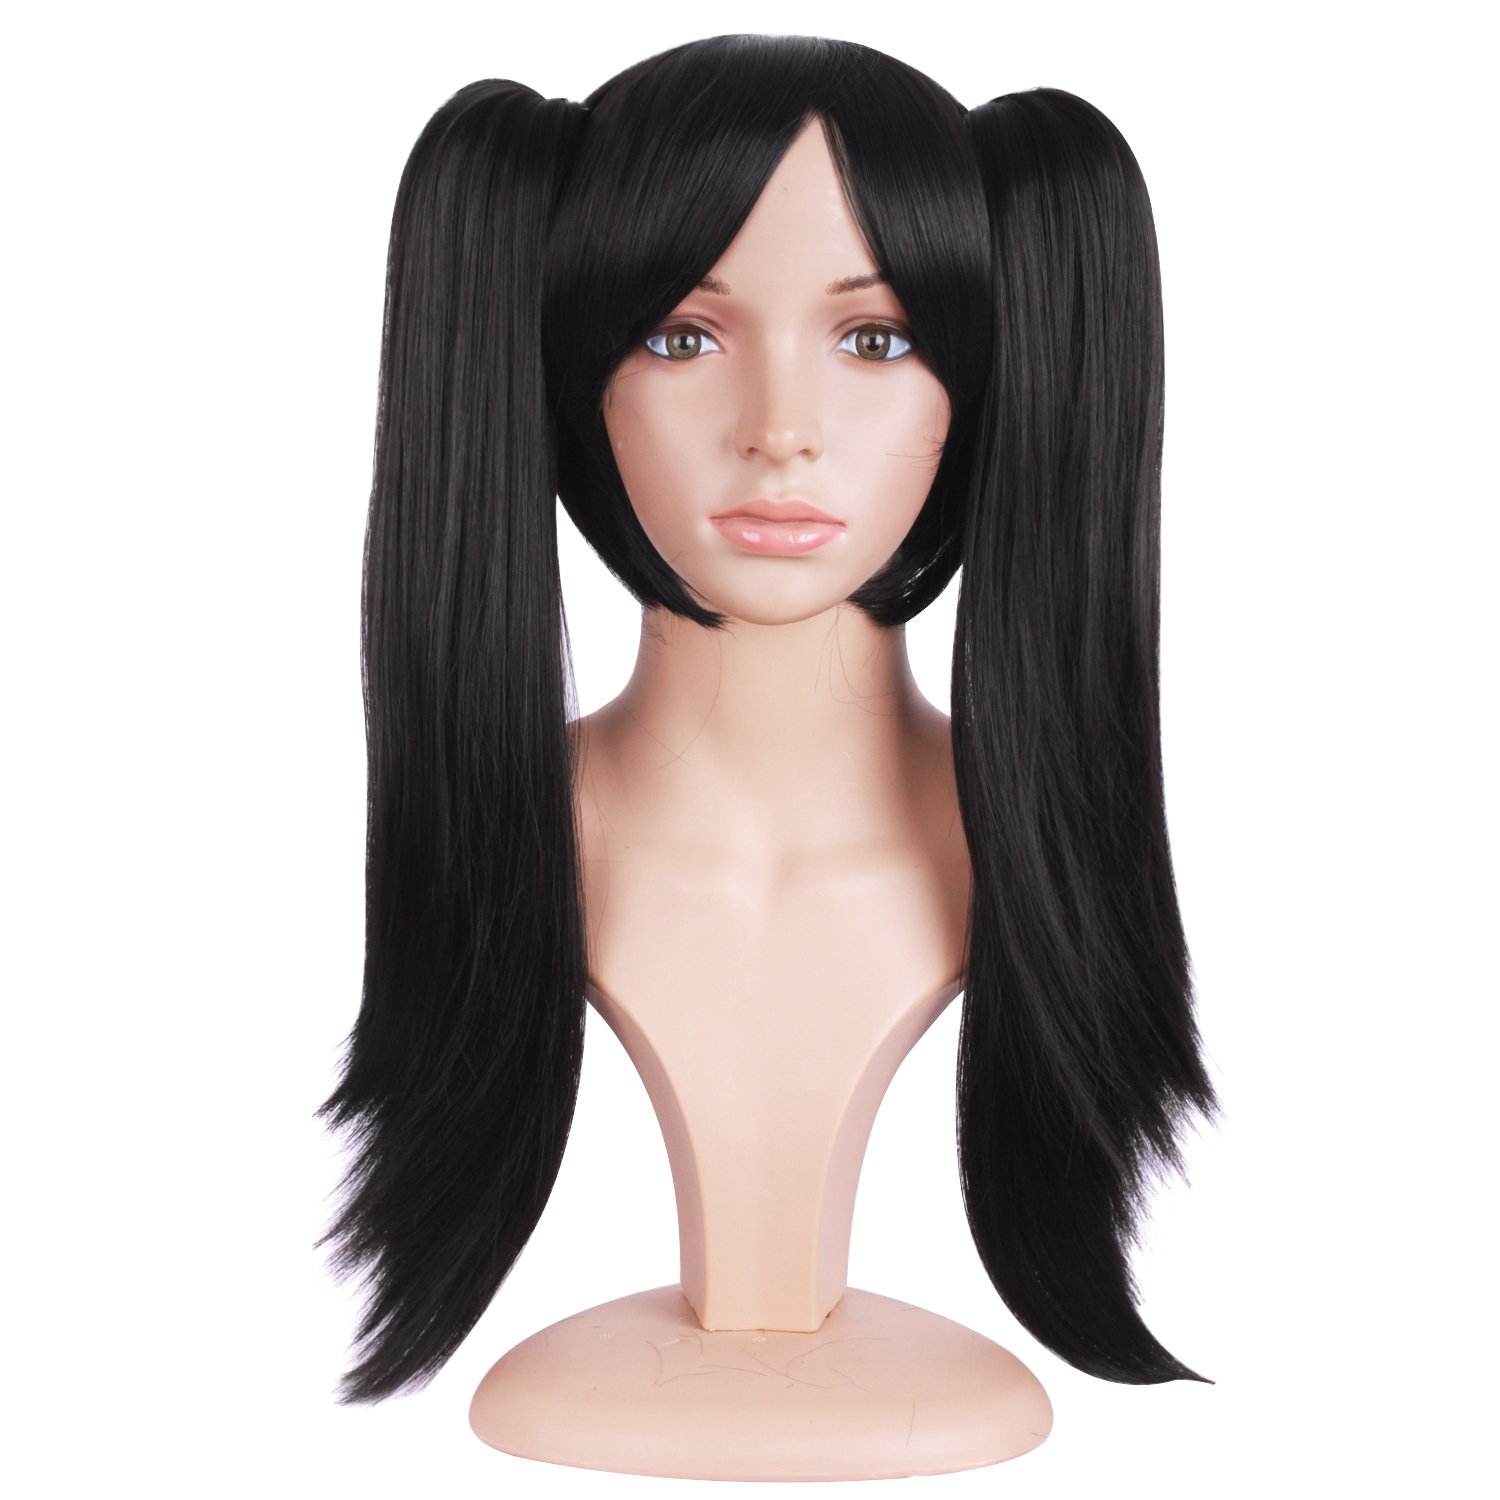 Price:$17.99    MapofBeauty 20"/50cm Double Tail Straight Hair Cosplay Braided Wigs (Black#4)  Beauty